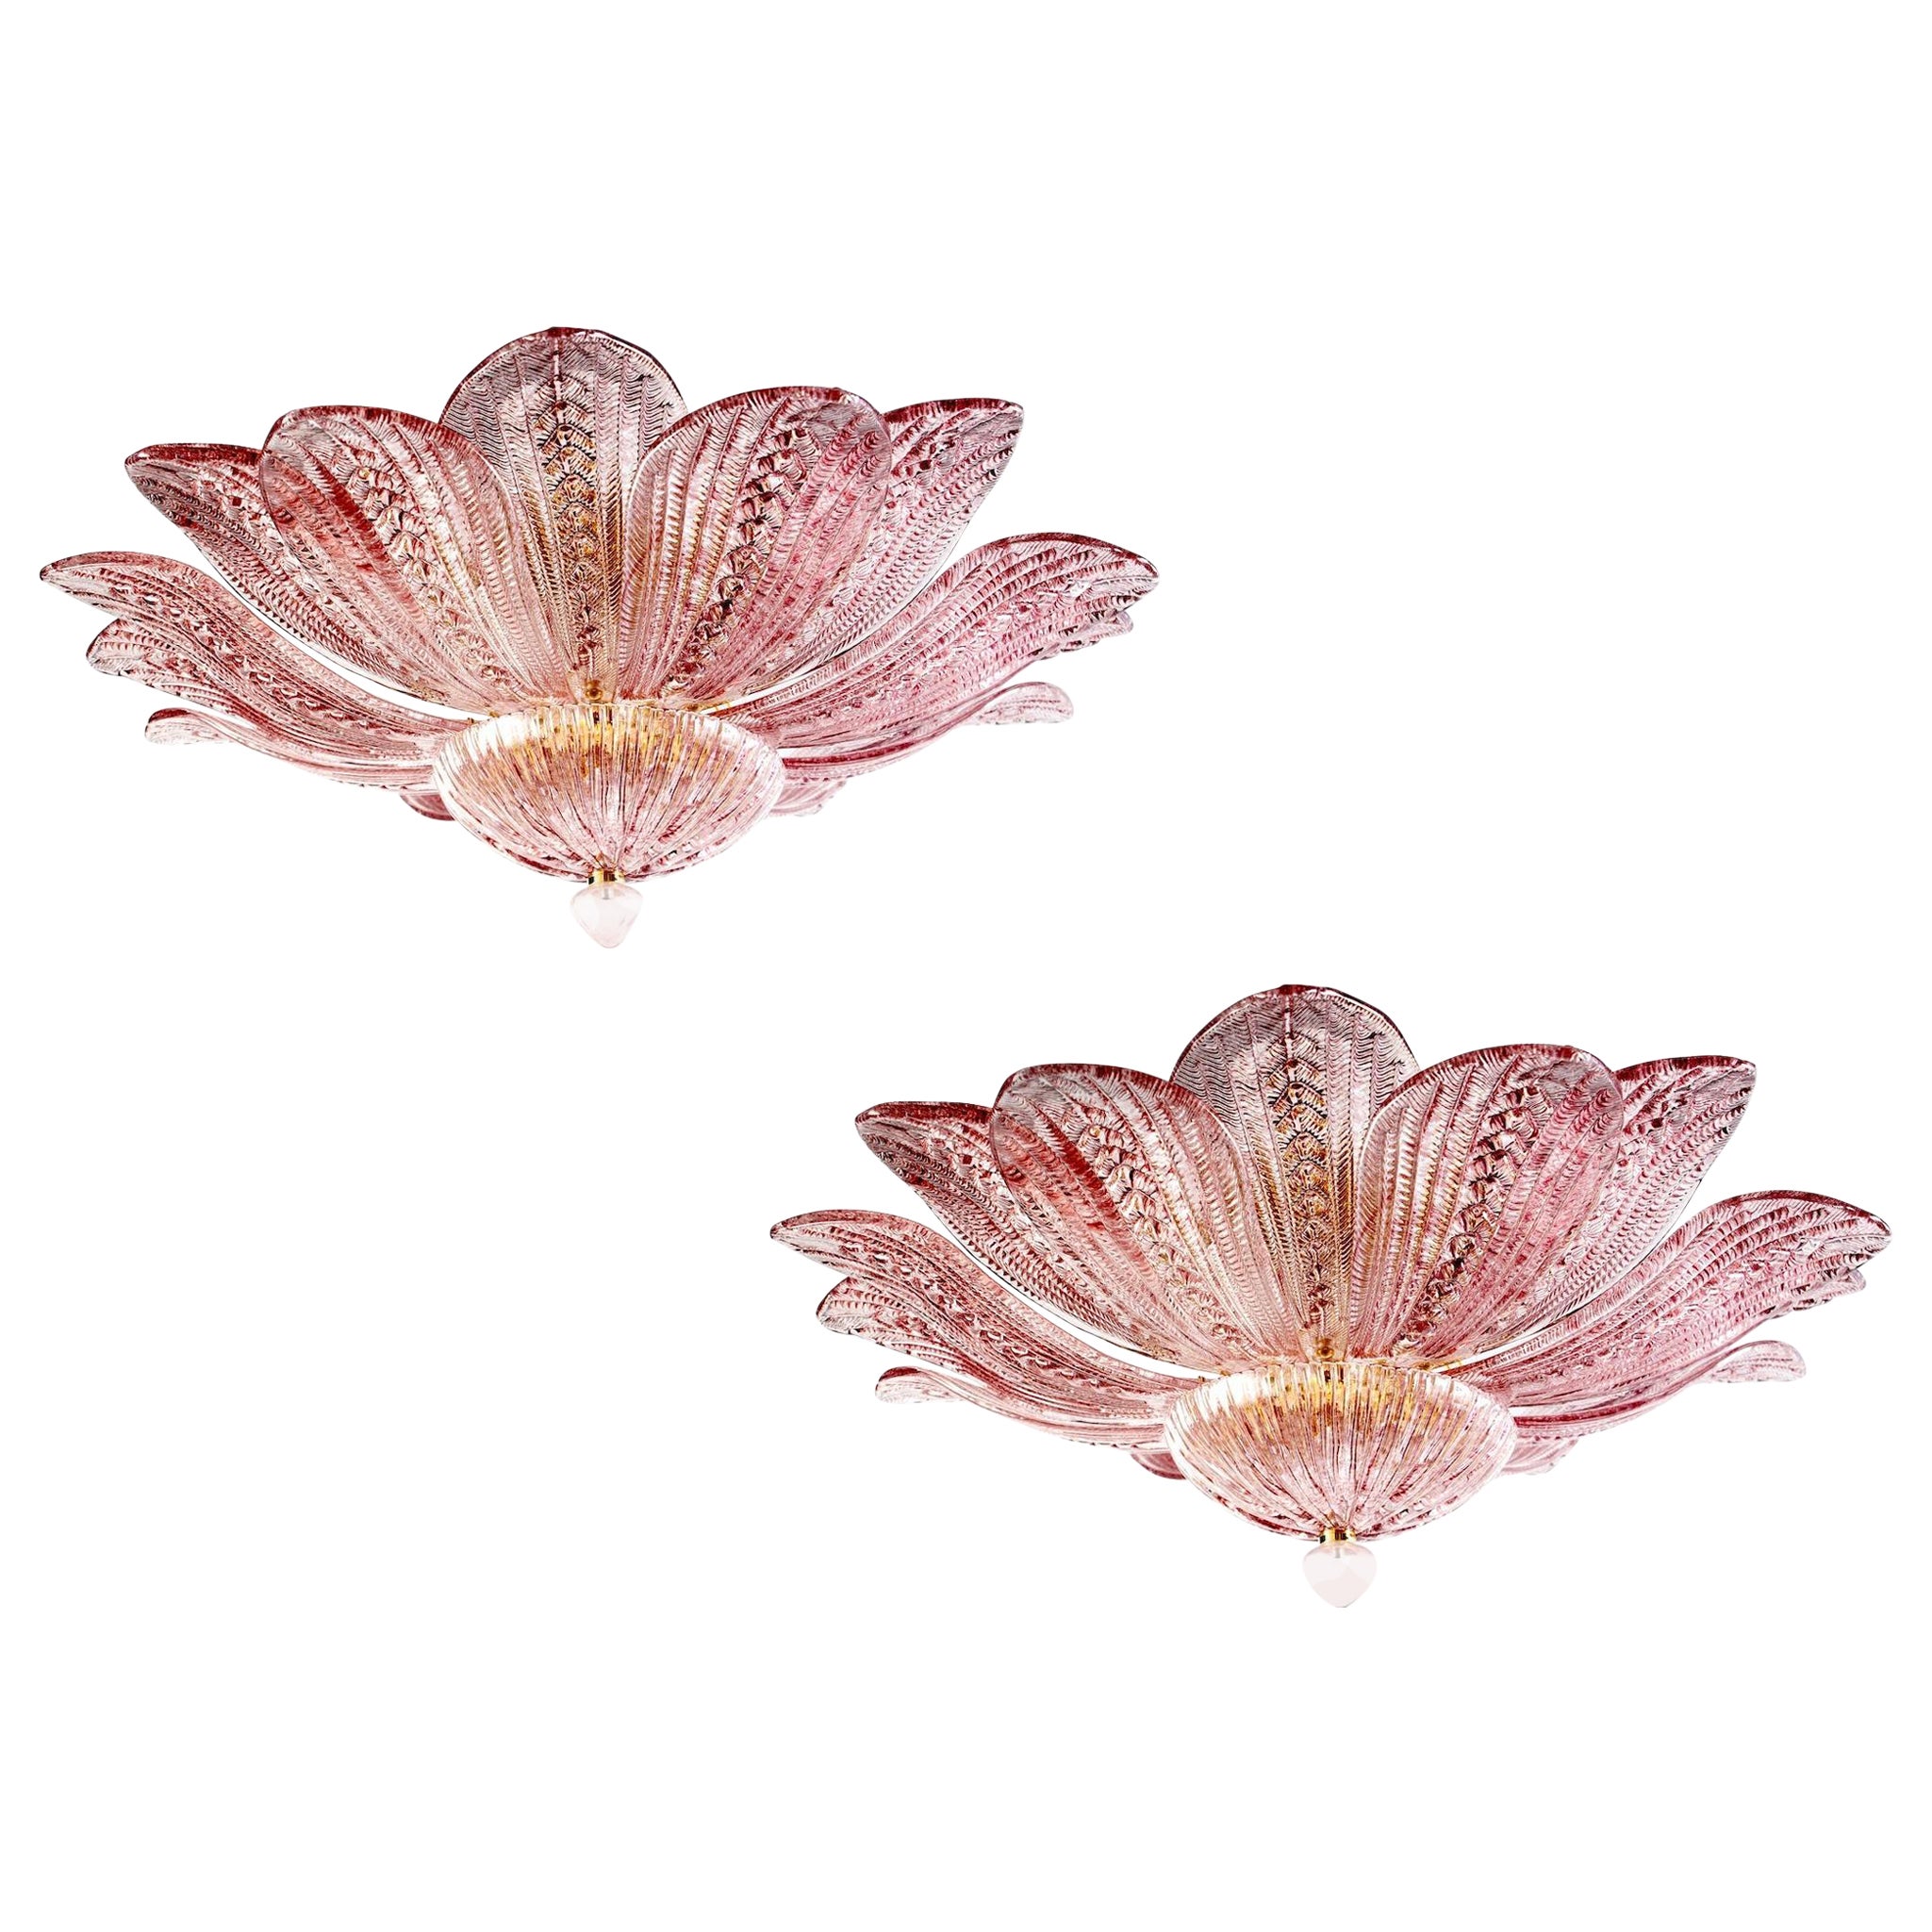 Graceful Pink Amethyst Murano Glass Leave Ceiling Light or Chandelier 4